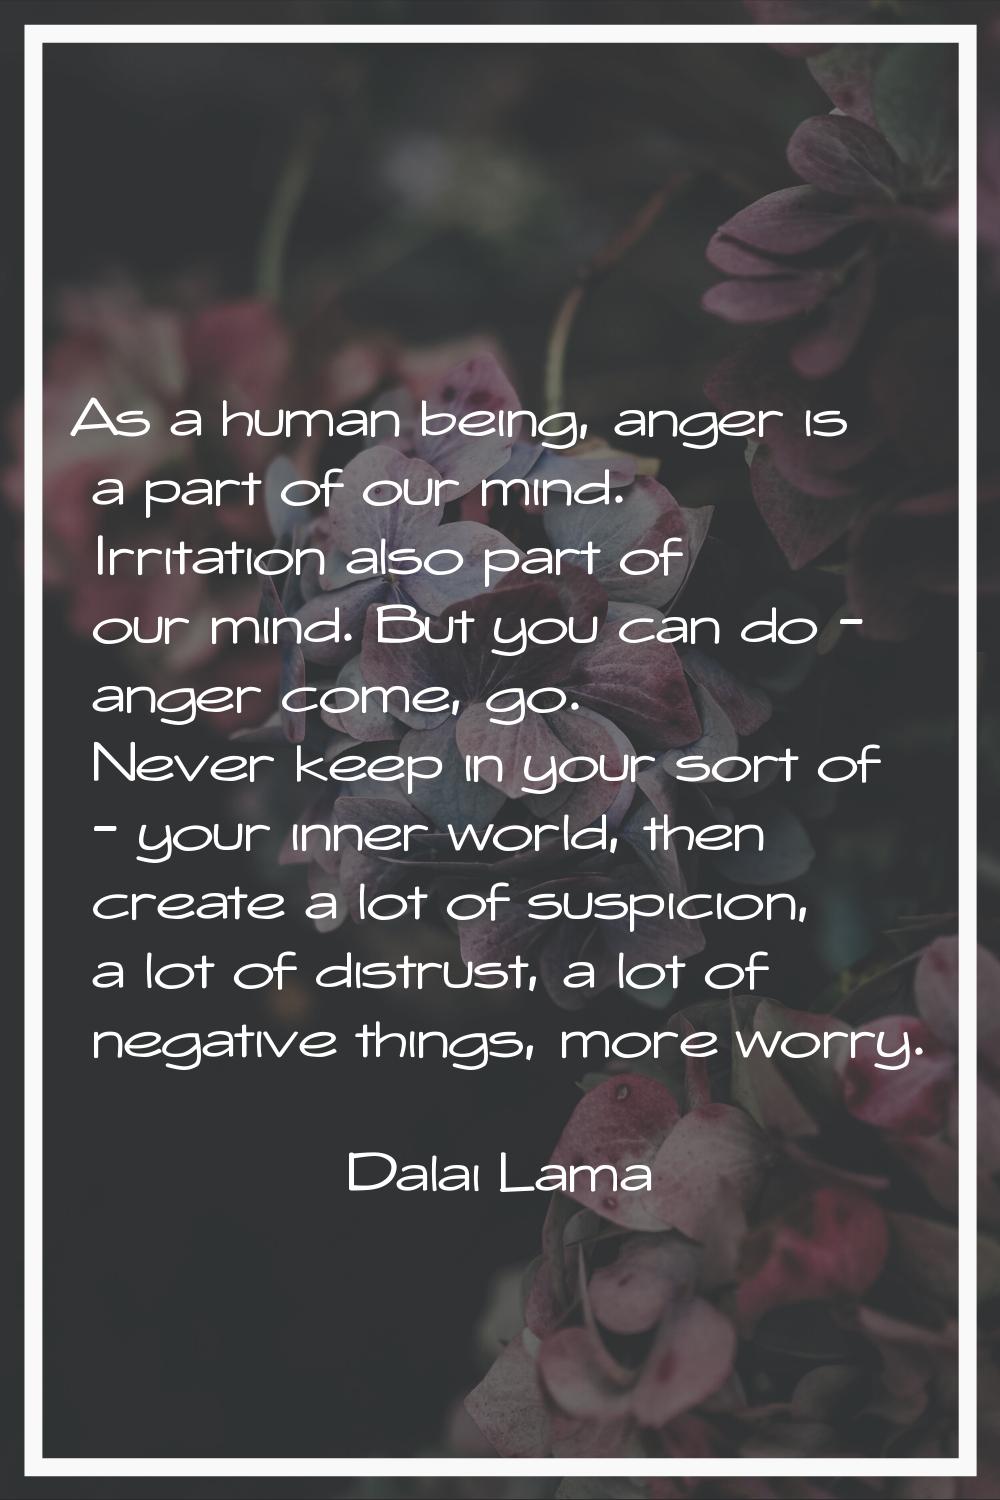 As a human being, anger is a part of our mind. Irritation also part of our mind. But you can do - a